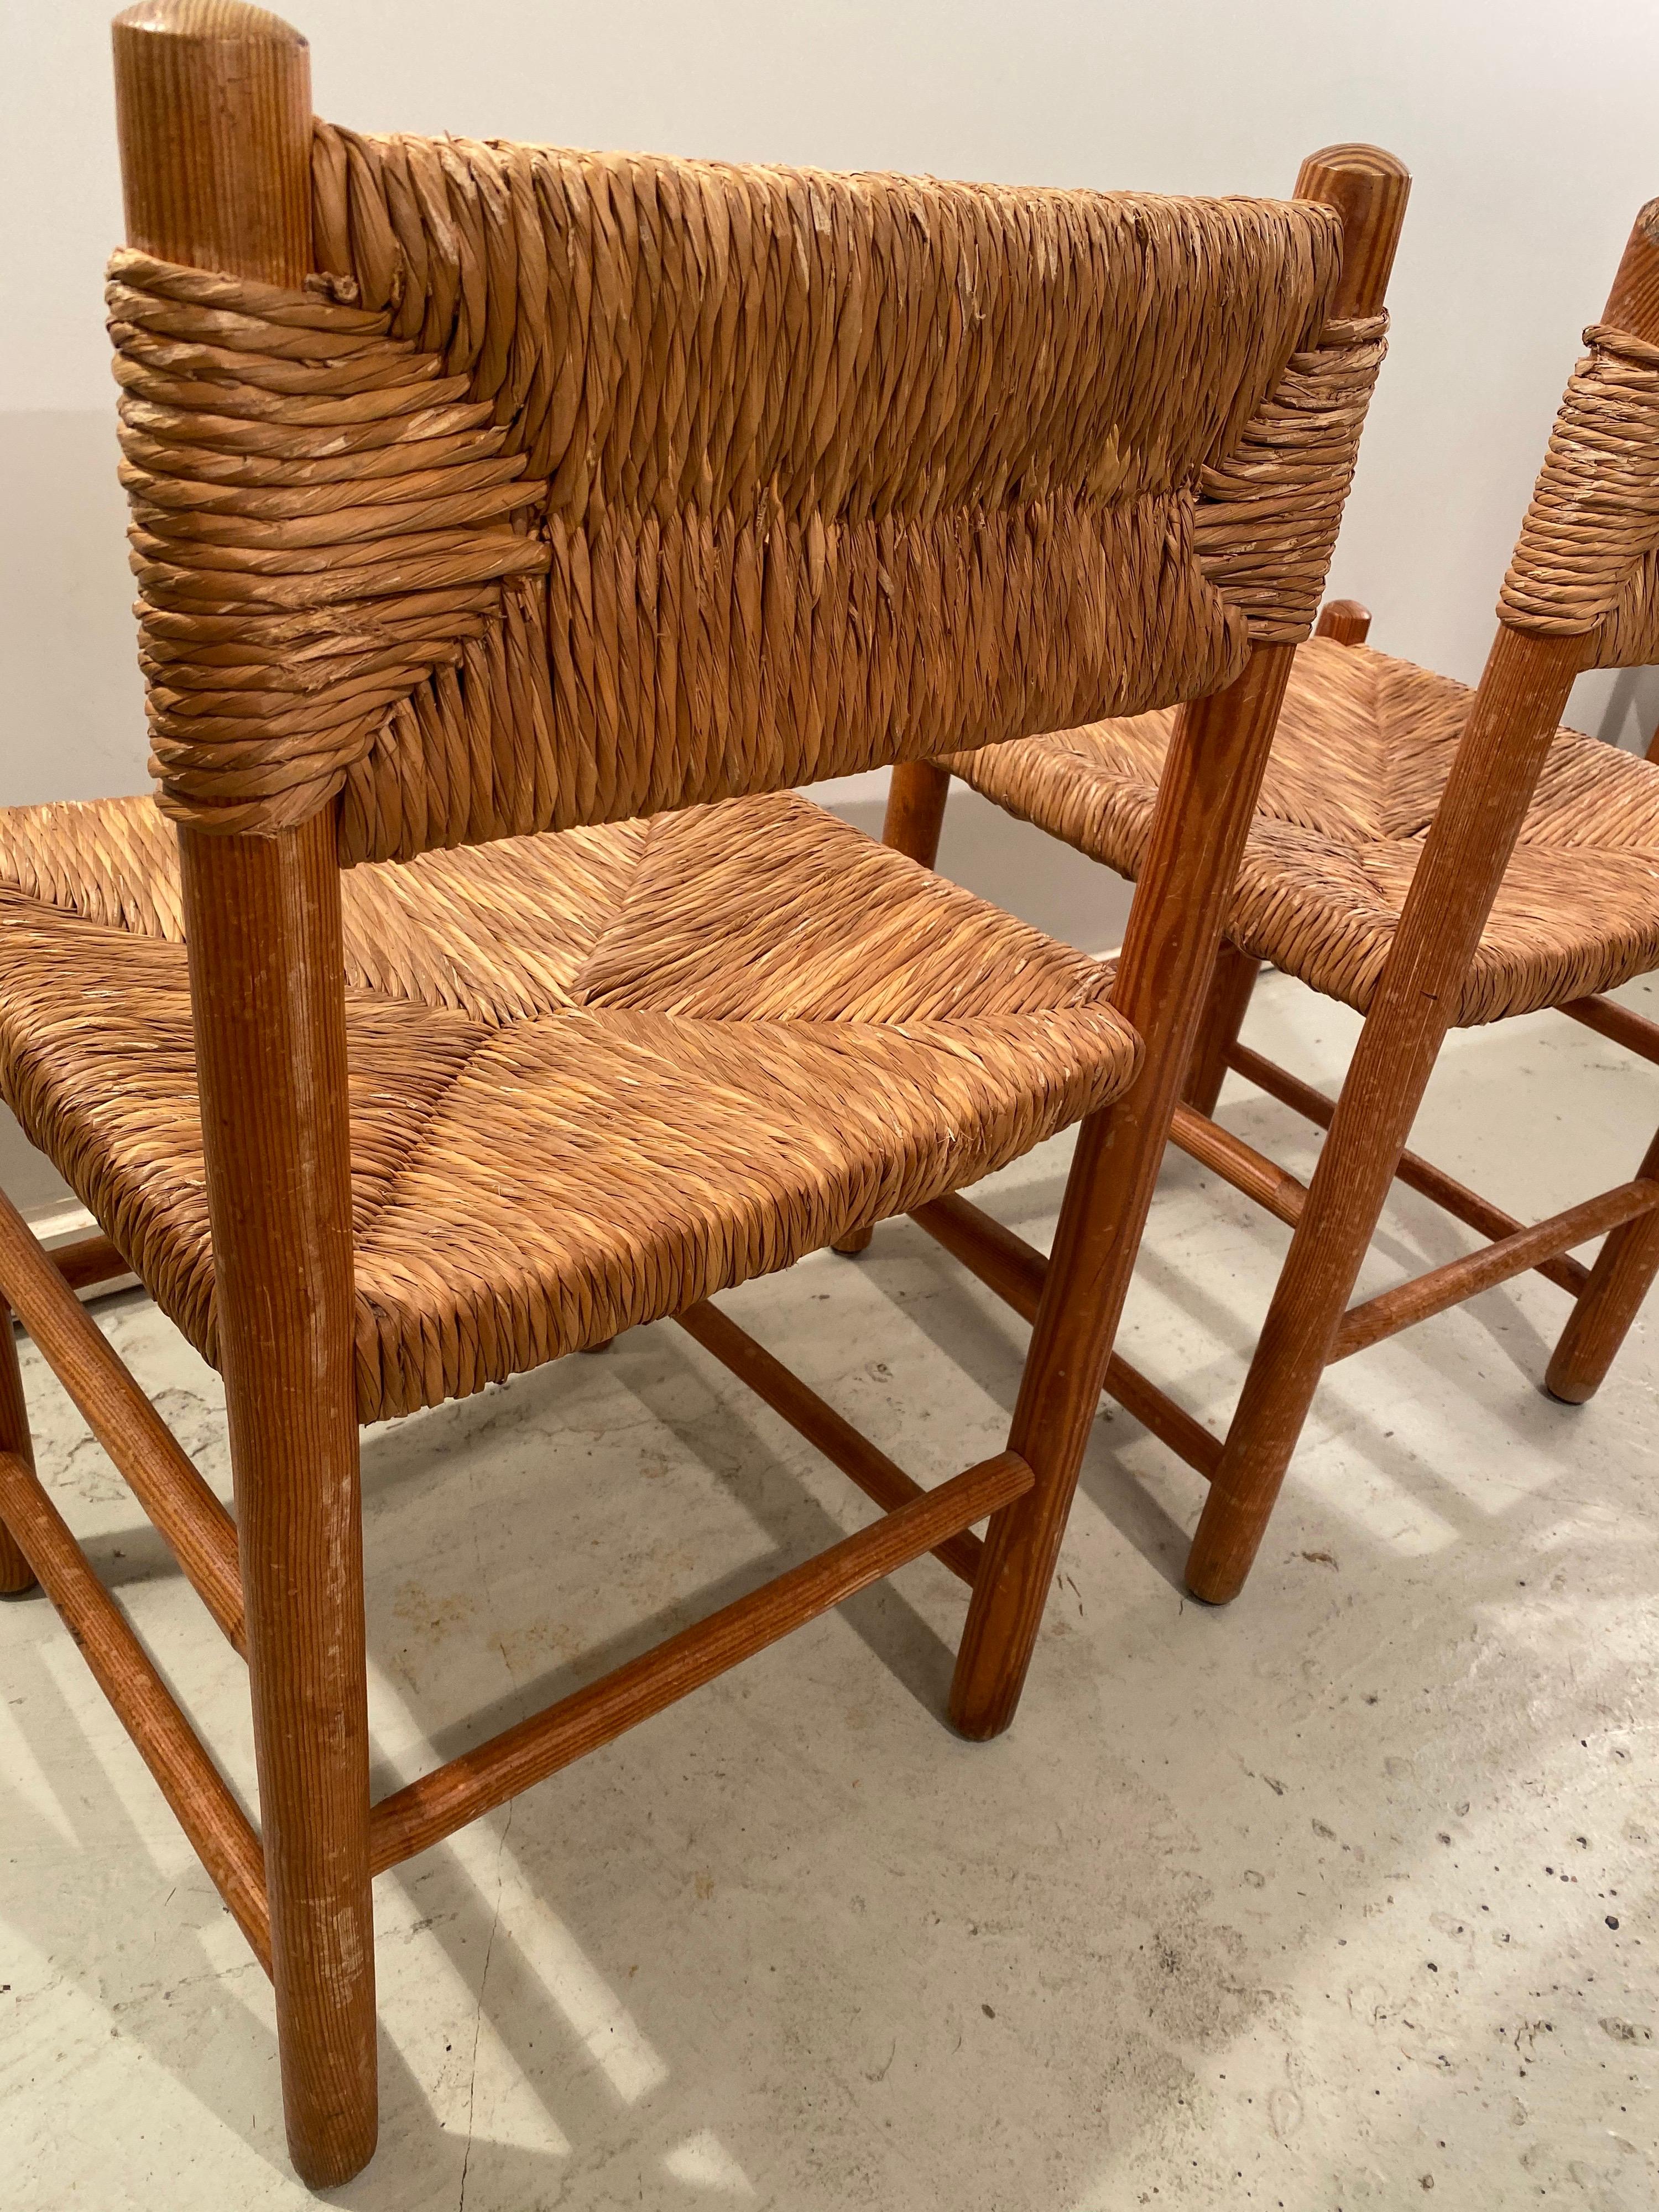 Pair of Wicker Dordogne Chairs by Charlotte Perriand for Sentou, 1950s For Sale 2